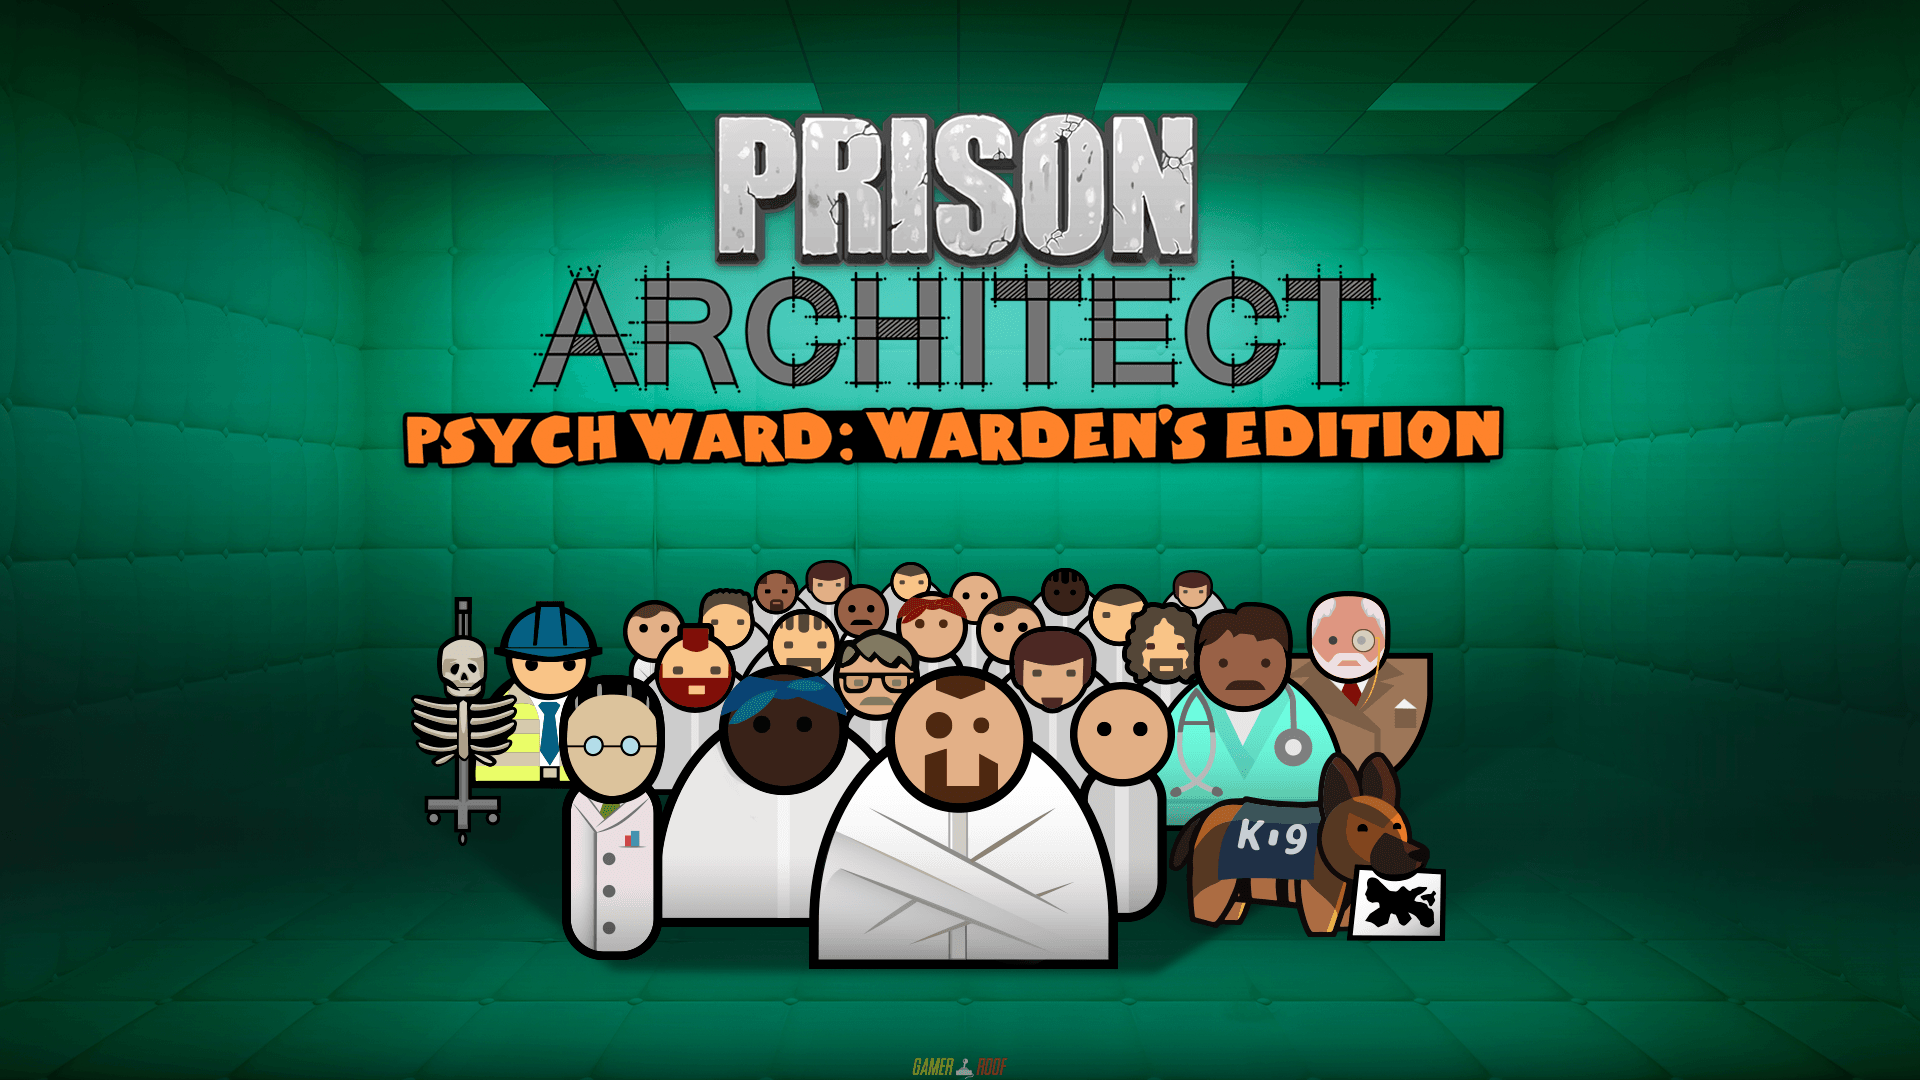 Prison Architect Psych Ward Warden's Edition PS4 Version Full Game Free Download